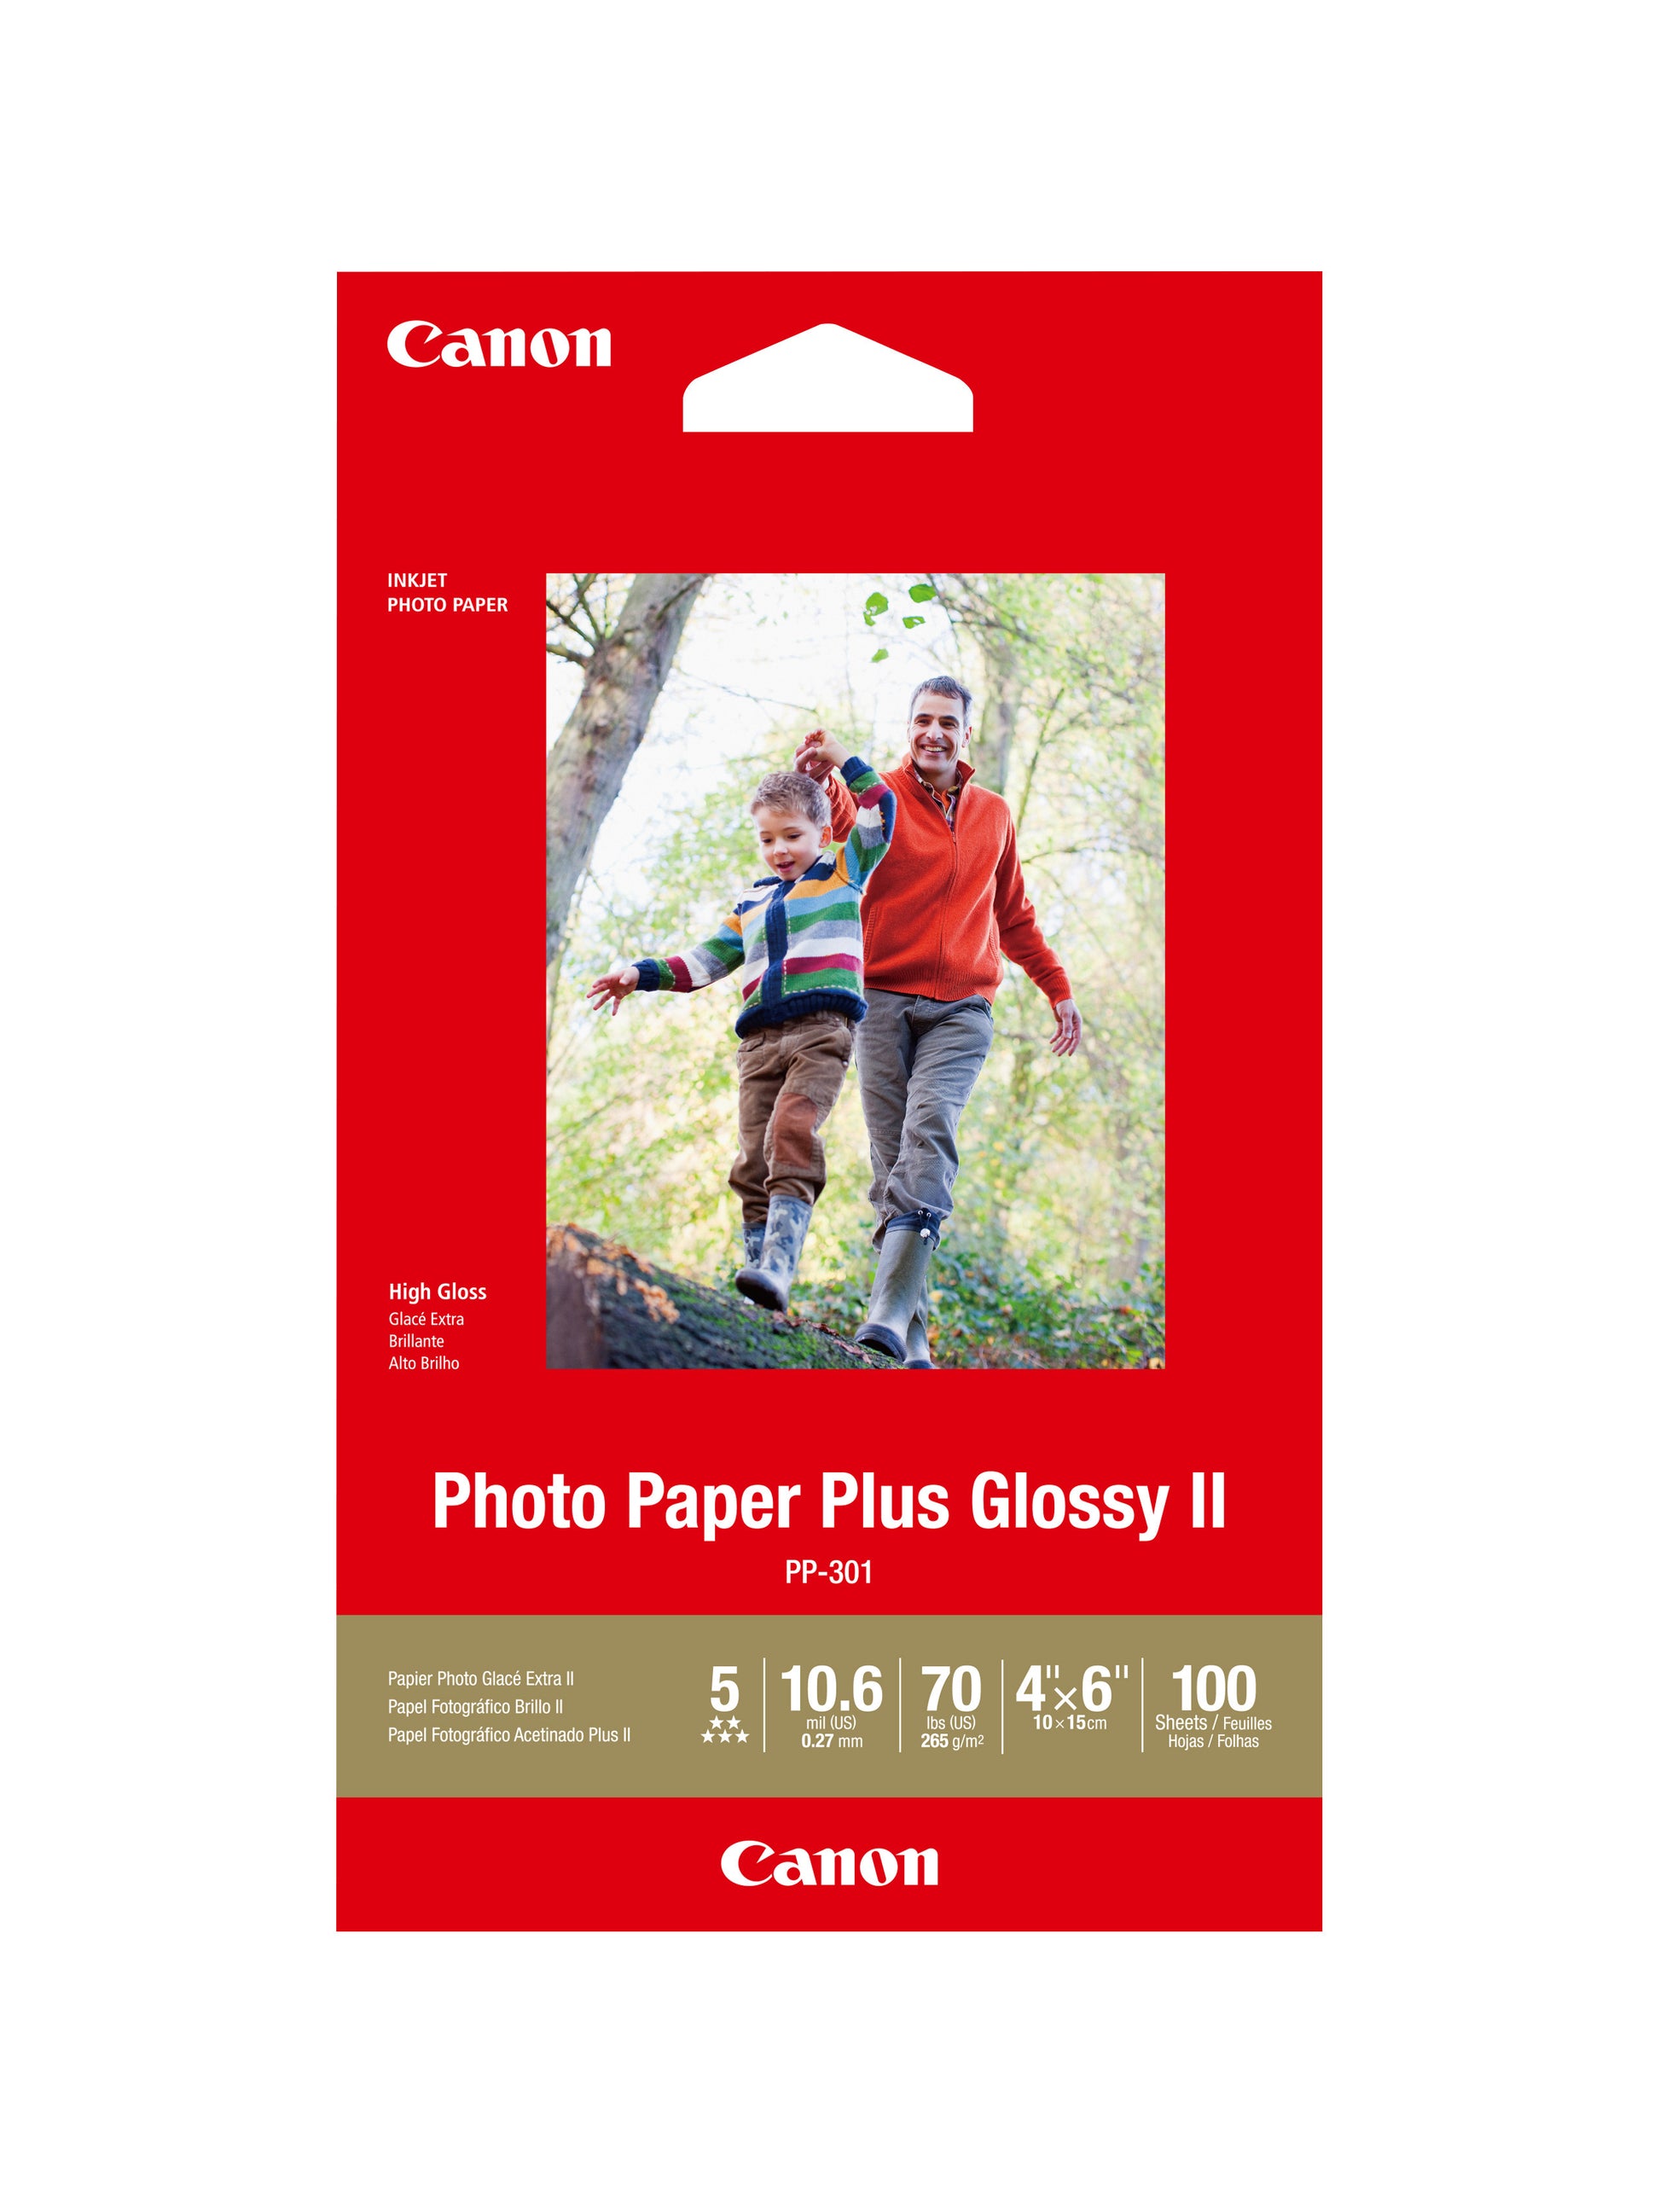 Shop Canon Photo Paper Plus Glossy II - PP-301 - 4x6 (100 Sheets)